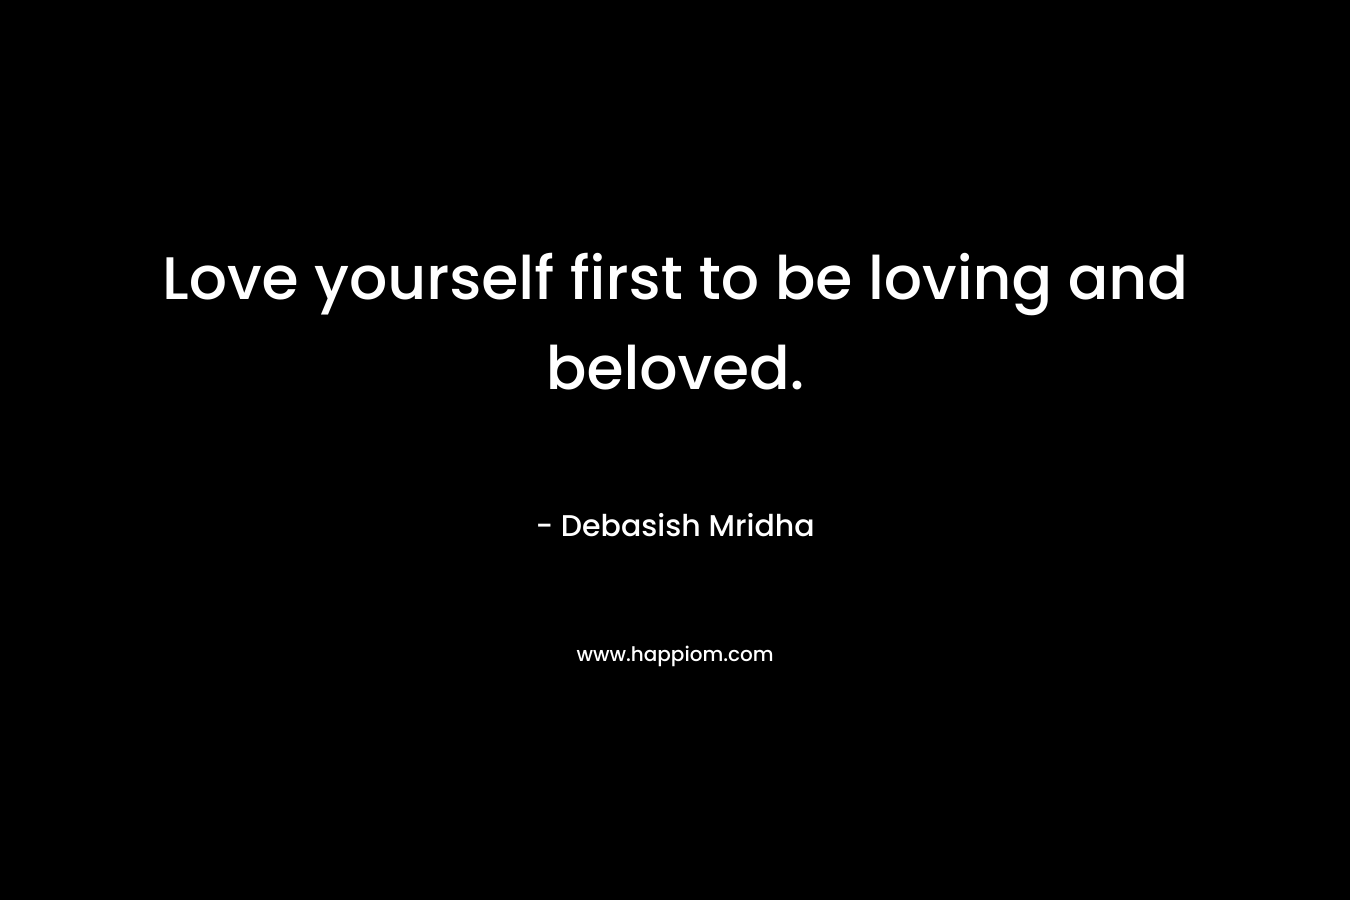 Love yourself first to be loving and beloved.